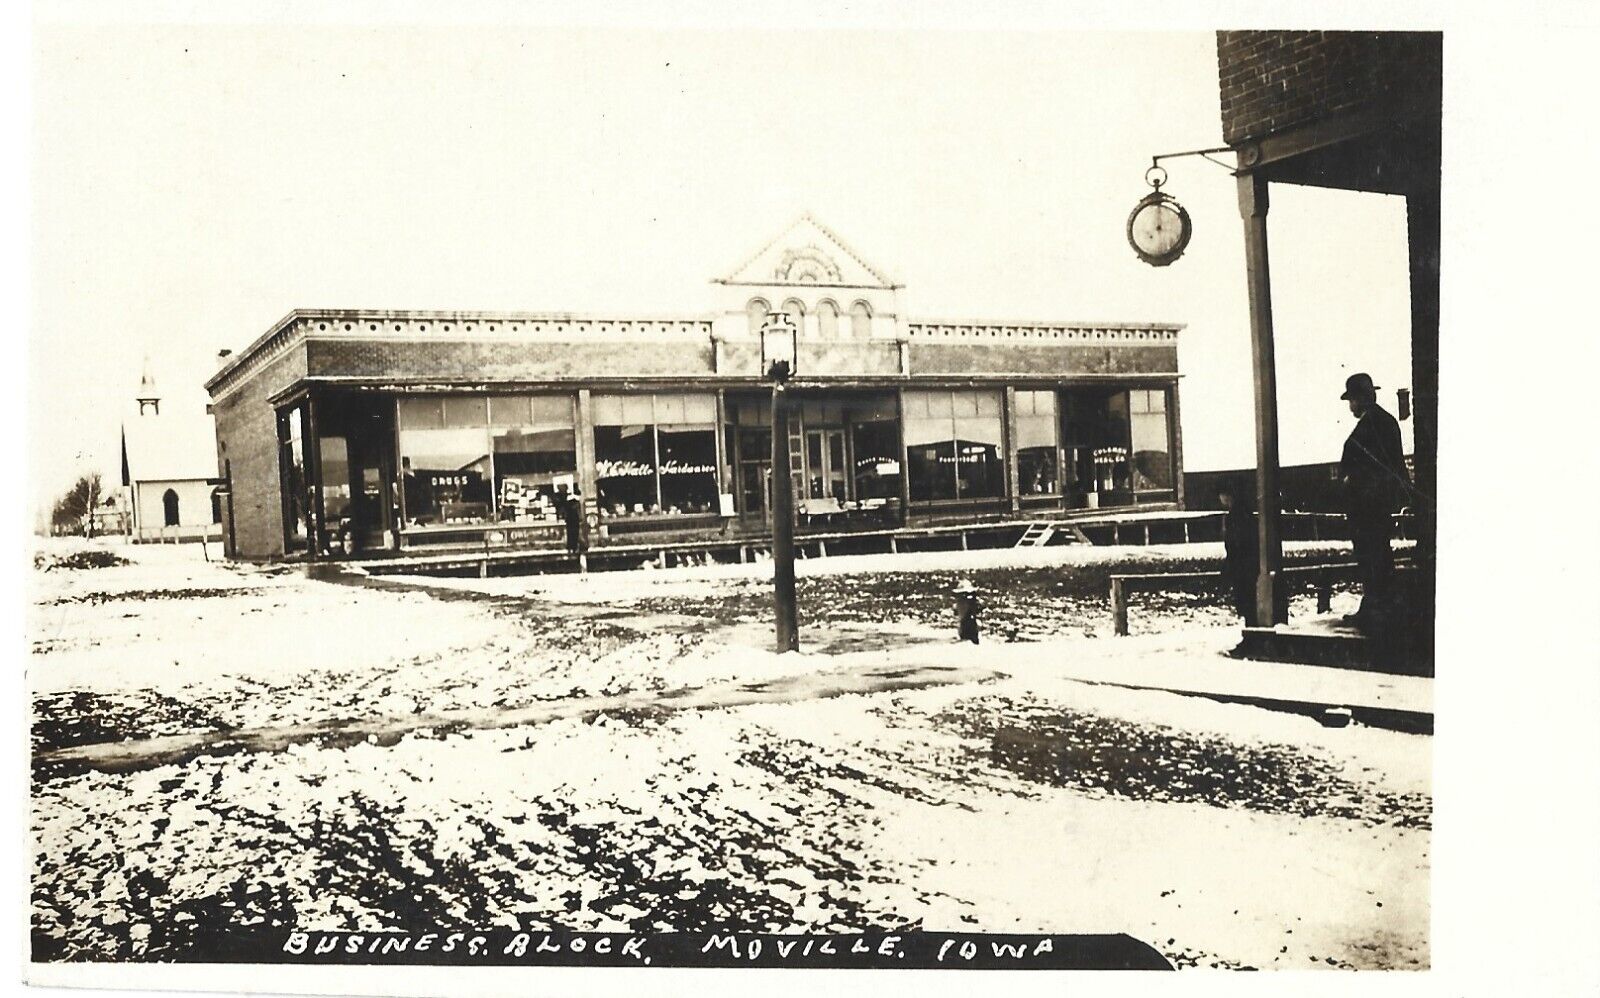 Business Block/drug store, Moville IA; nice 1930s RPPC